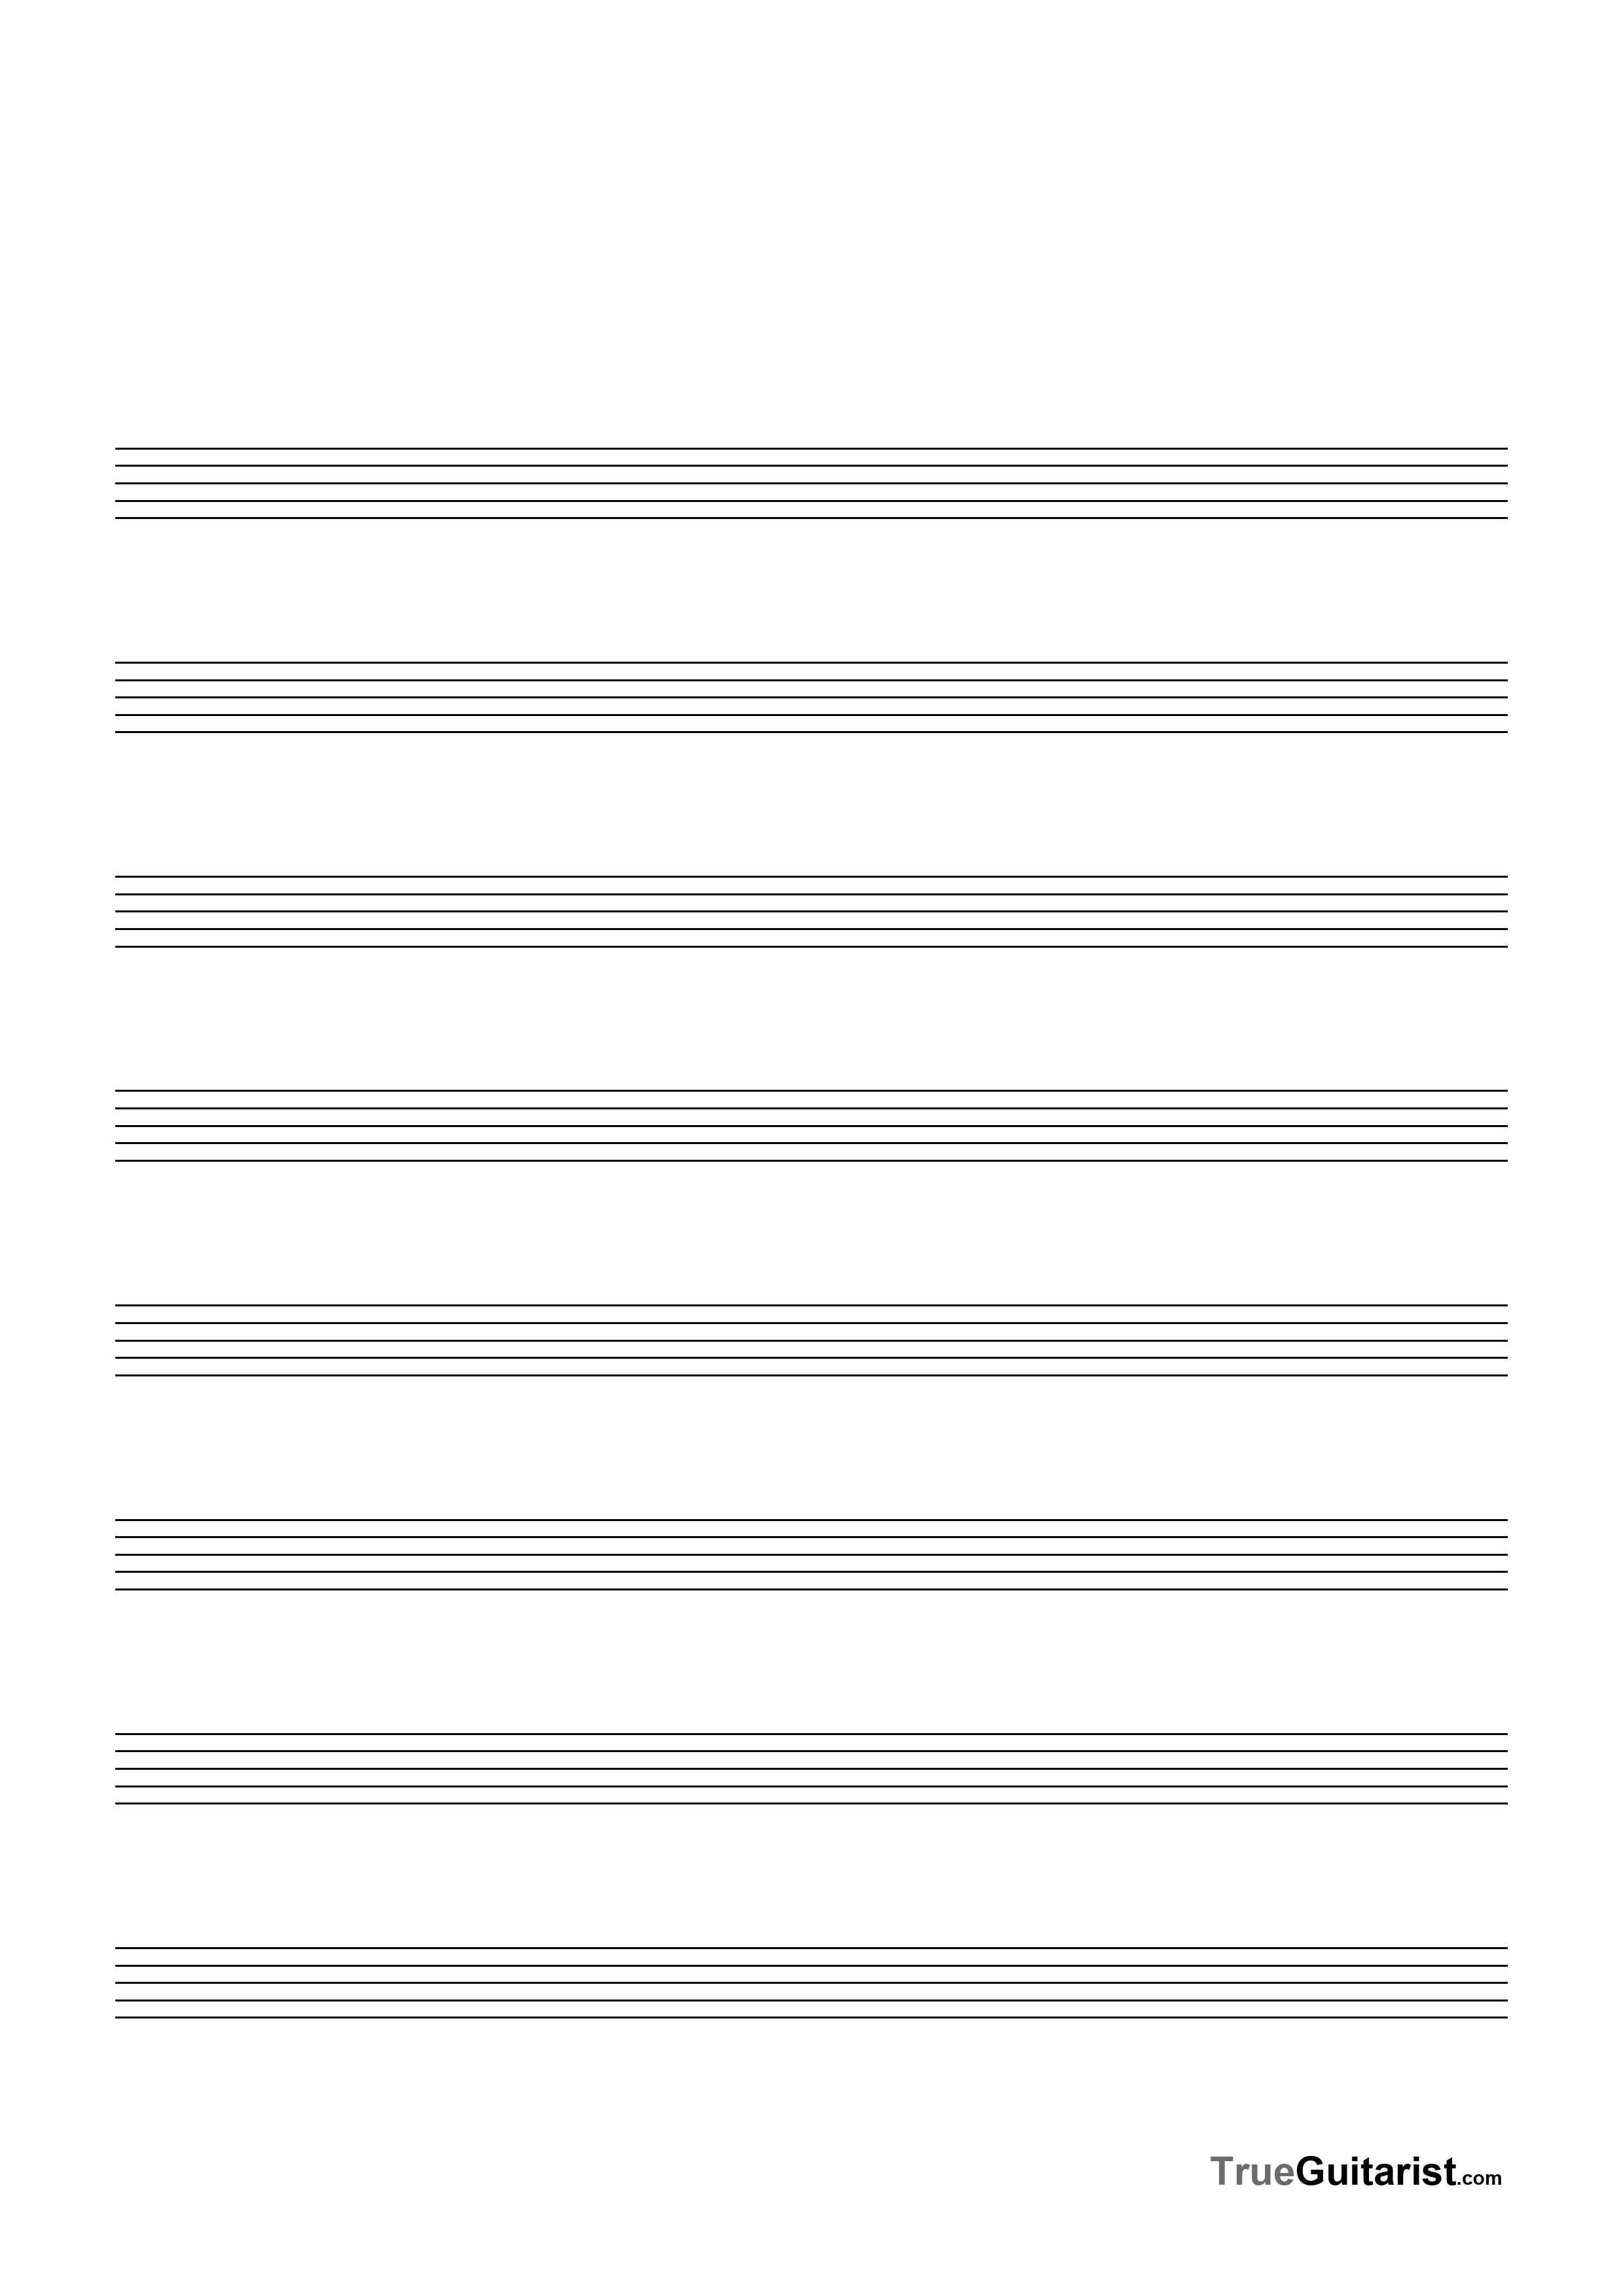 26 Images Of Music Staff Paper Template 8X10 | Bfegy - Free Printable Blank Music Staff Paper